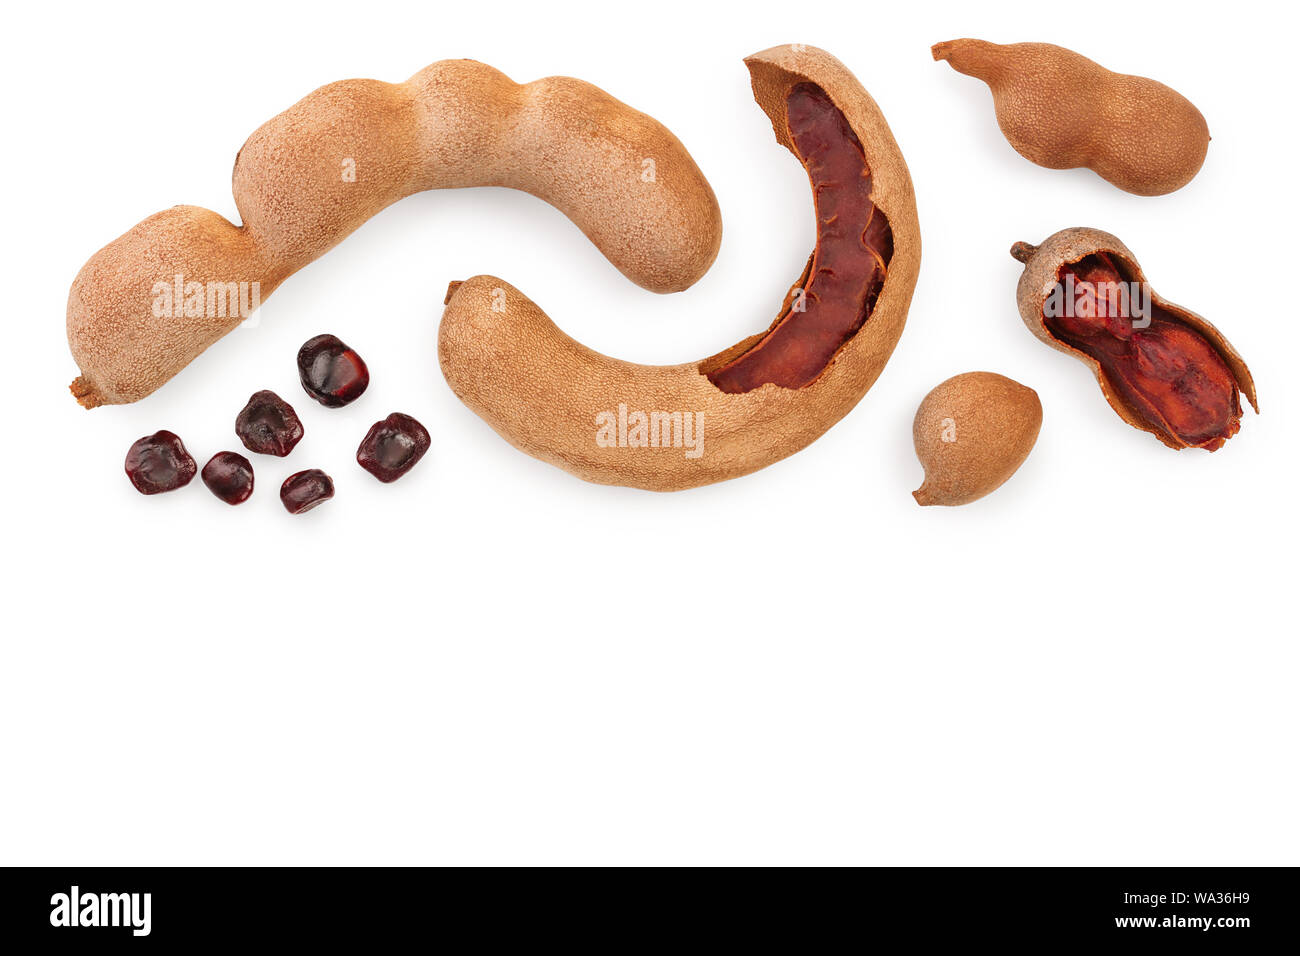 Tamarind Fruit With Seed Isolated On White Background With Copy Space For Your Text Top View Flat Lay Stock Photo Alamy